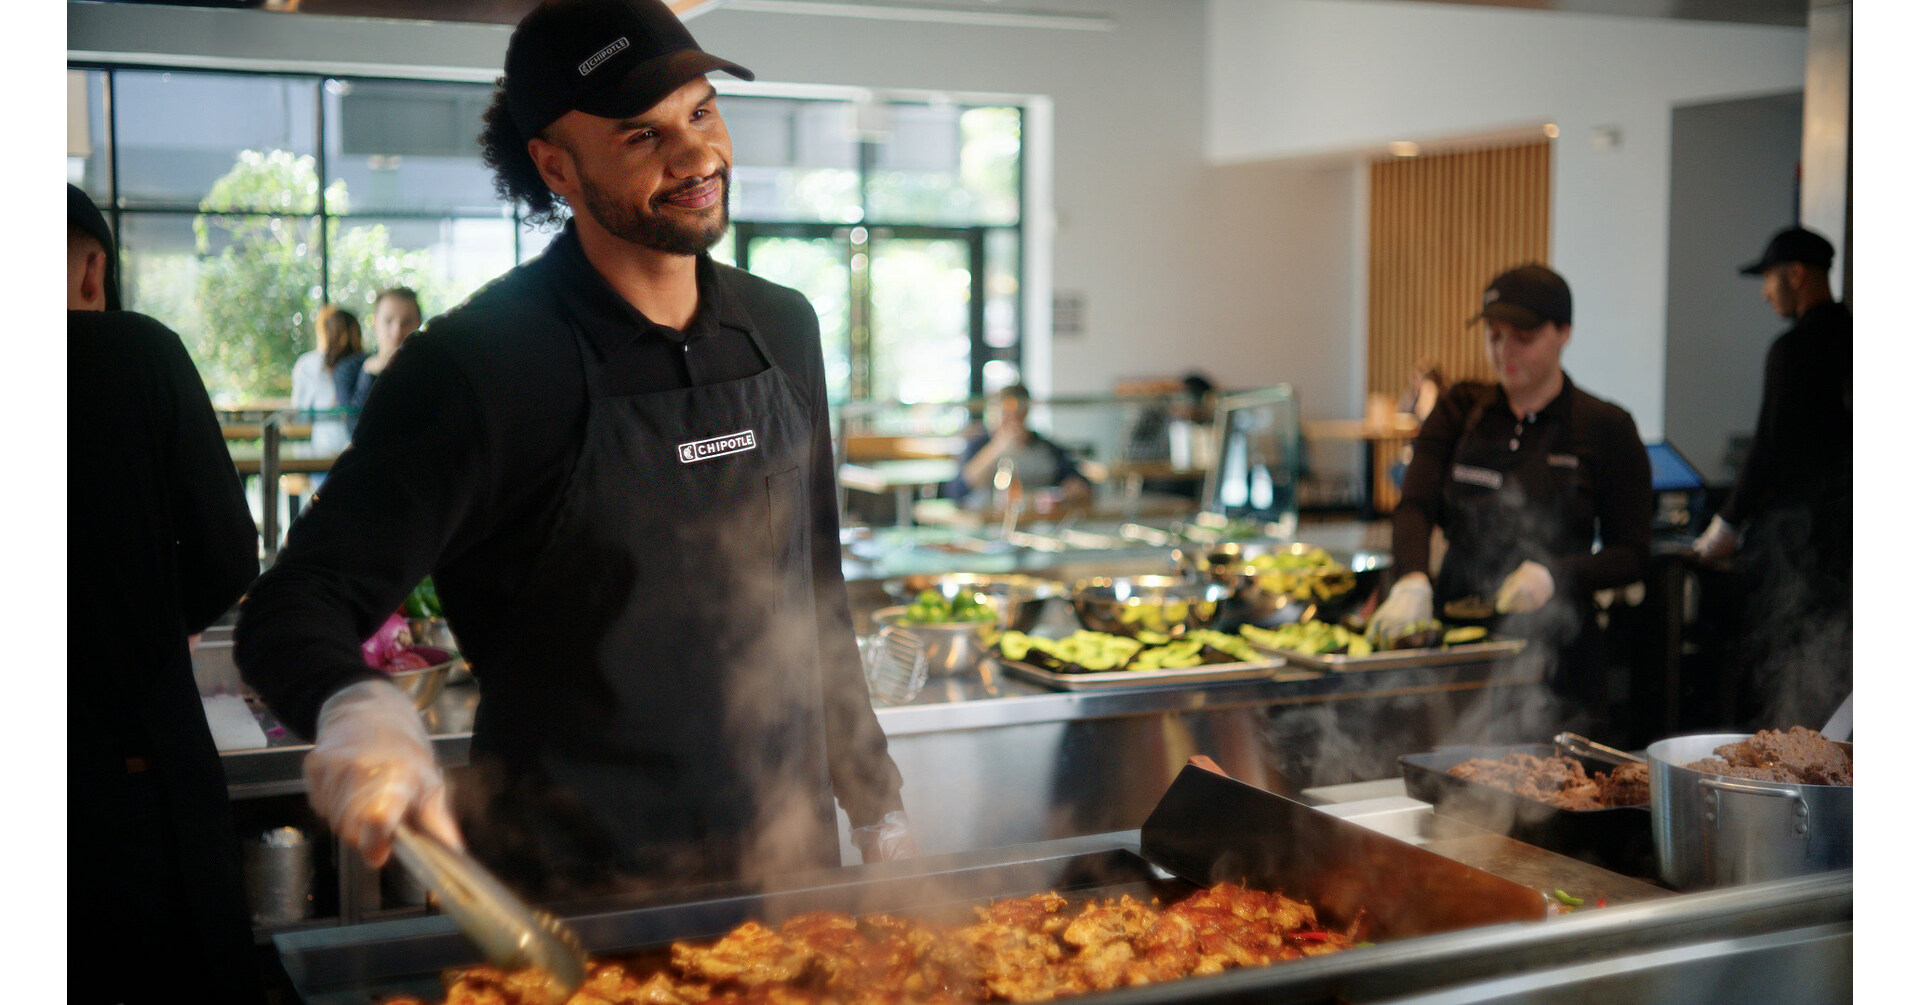 CHIPOTLE PULLS BACK THE FOIL TO ATTRACT TALENT IN LATEST HIRING PUSH